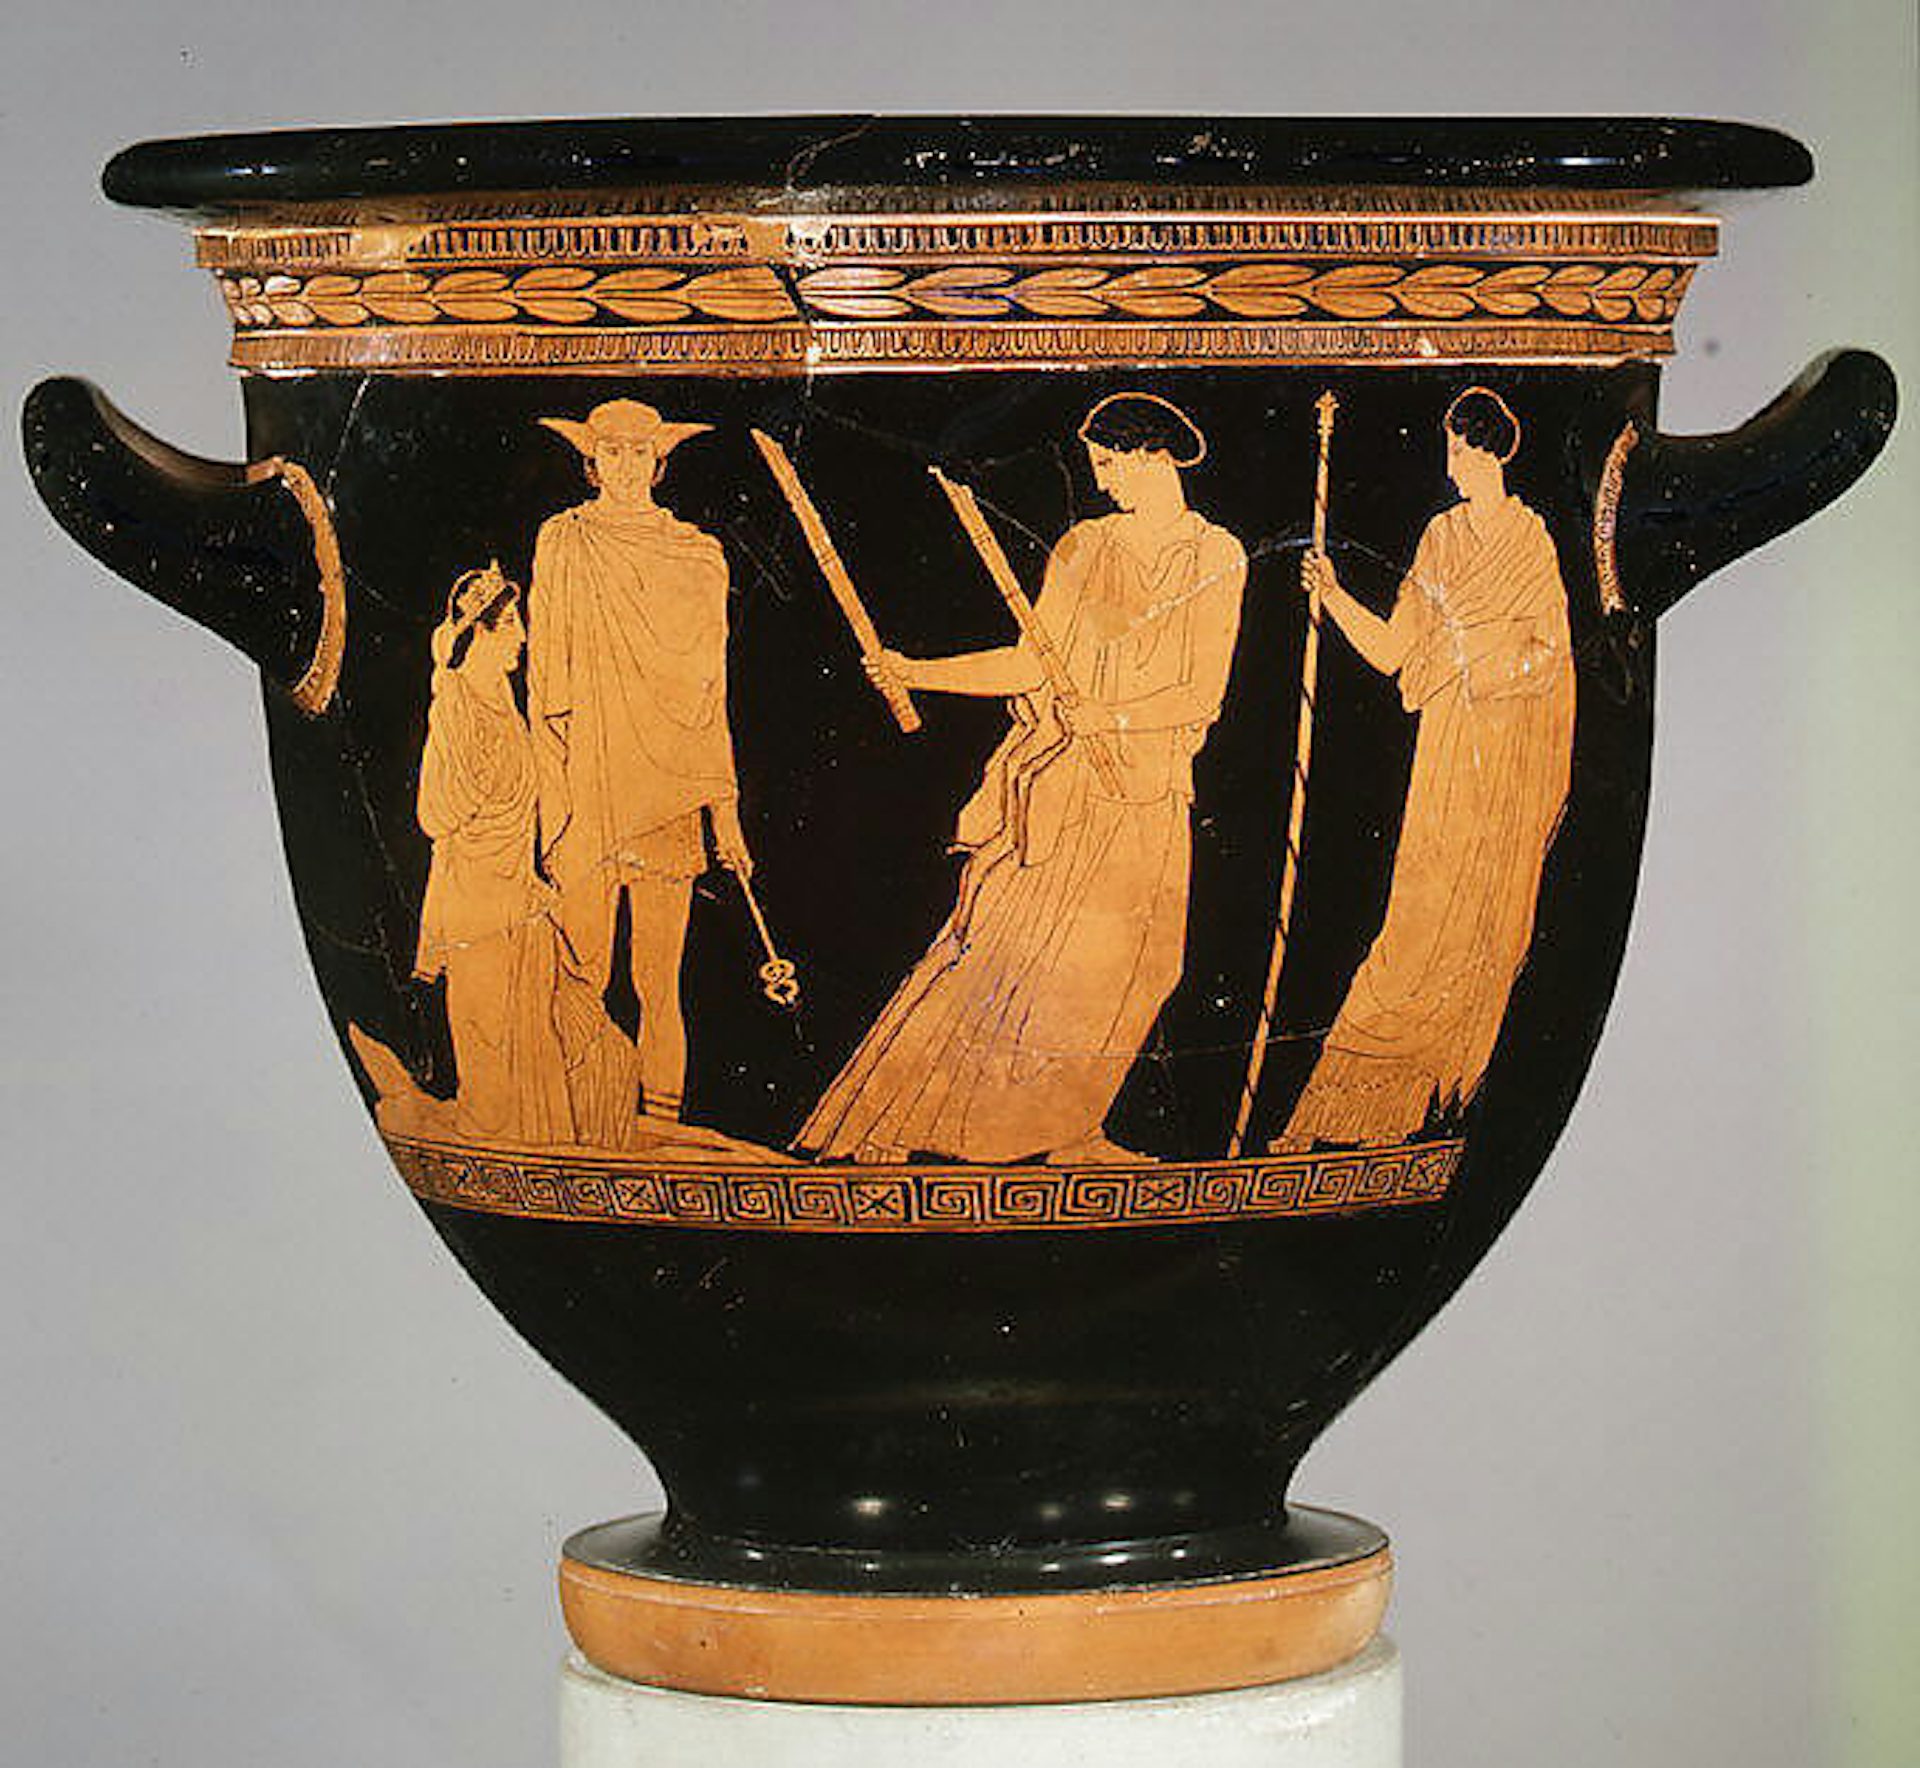 Terracotta red-figure bell-krater showing Persephone's ascension from the Underworld, ca 440 BCE